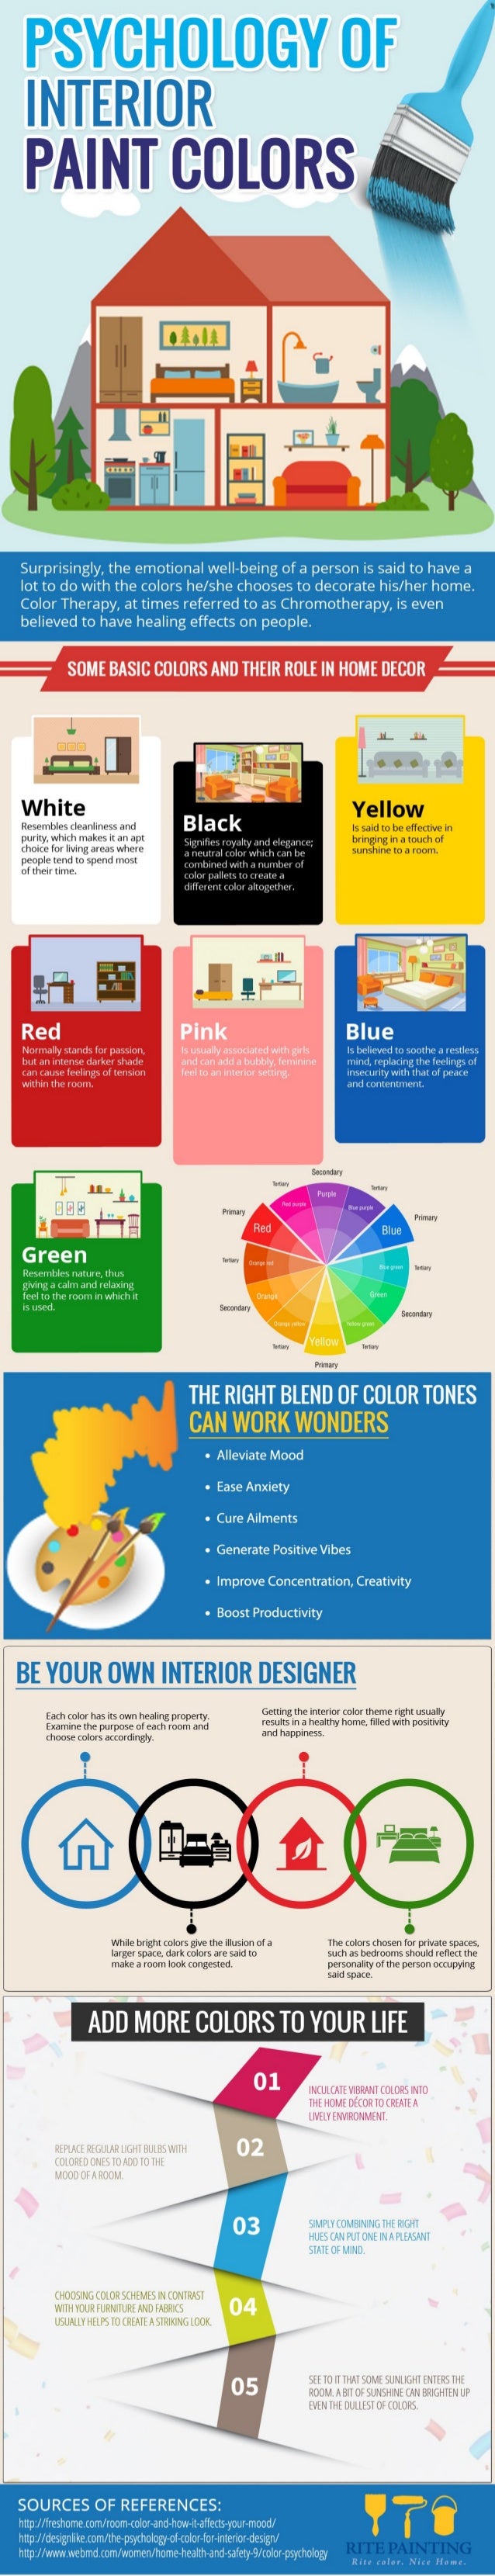 Psychology Of Interior Paint Colors